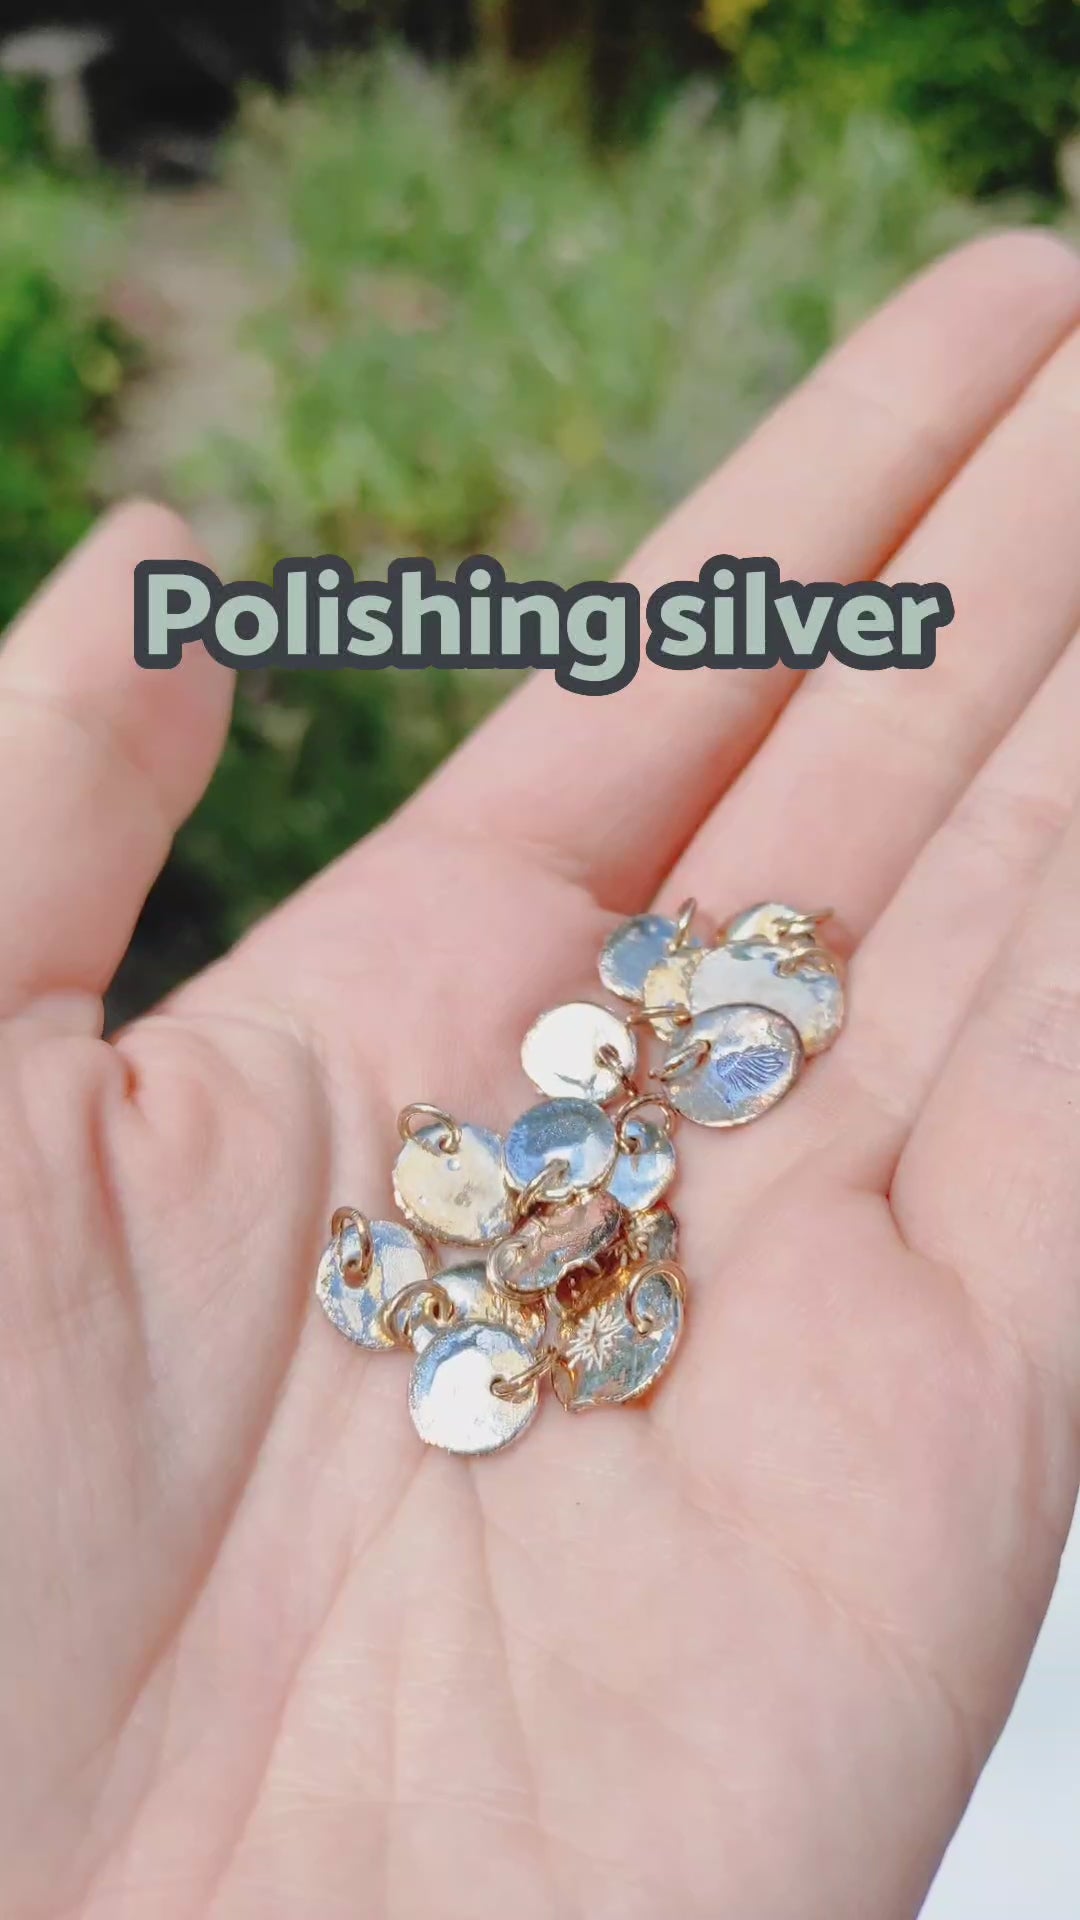 Polishing recycled silver charm necklaces